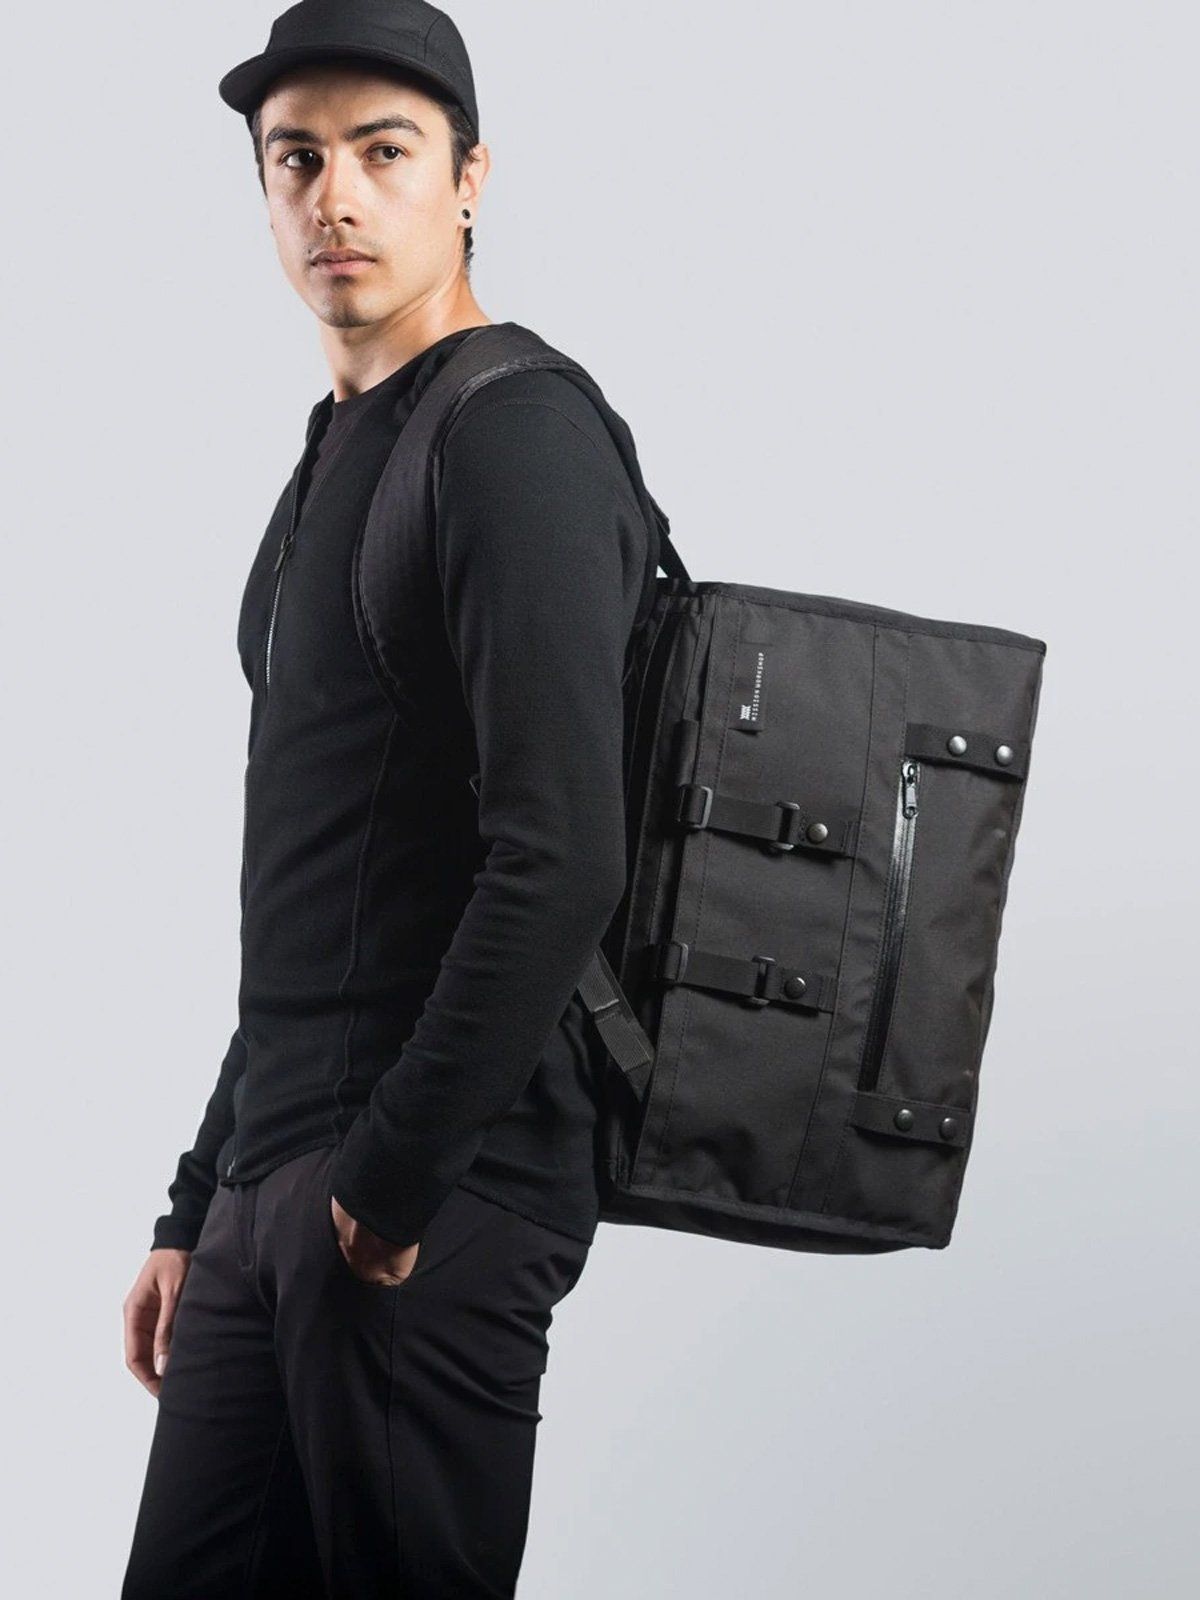 Transit : Duffle Backpack Harness by Mission Workshop - Weatherproof Bags & Technical Apparel - San Francisco & Los Angeles - Built to endure - Guaranteed forever